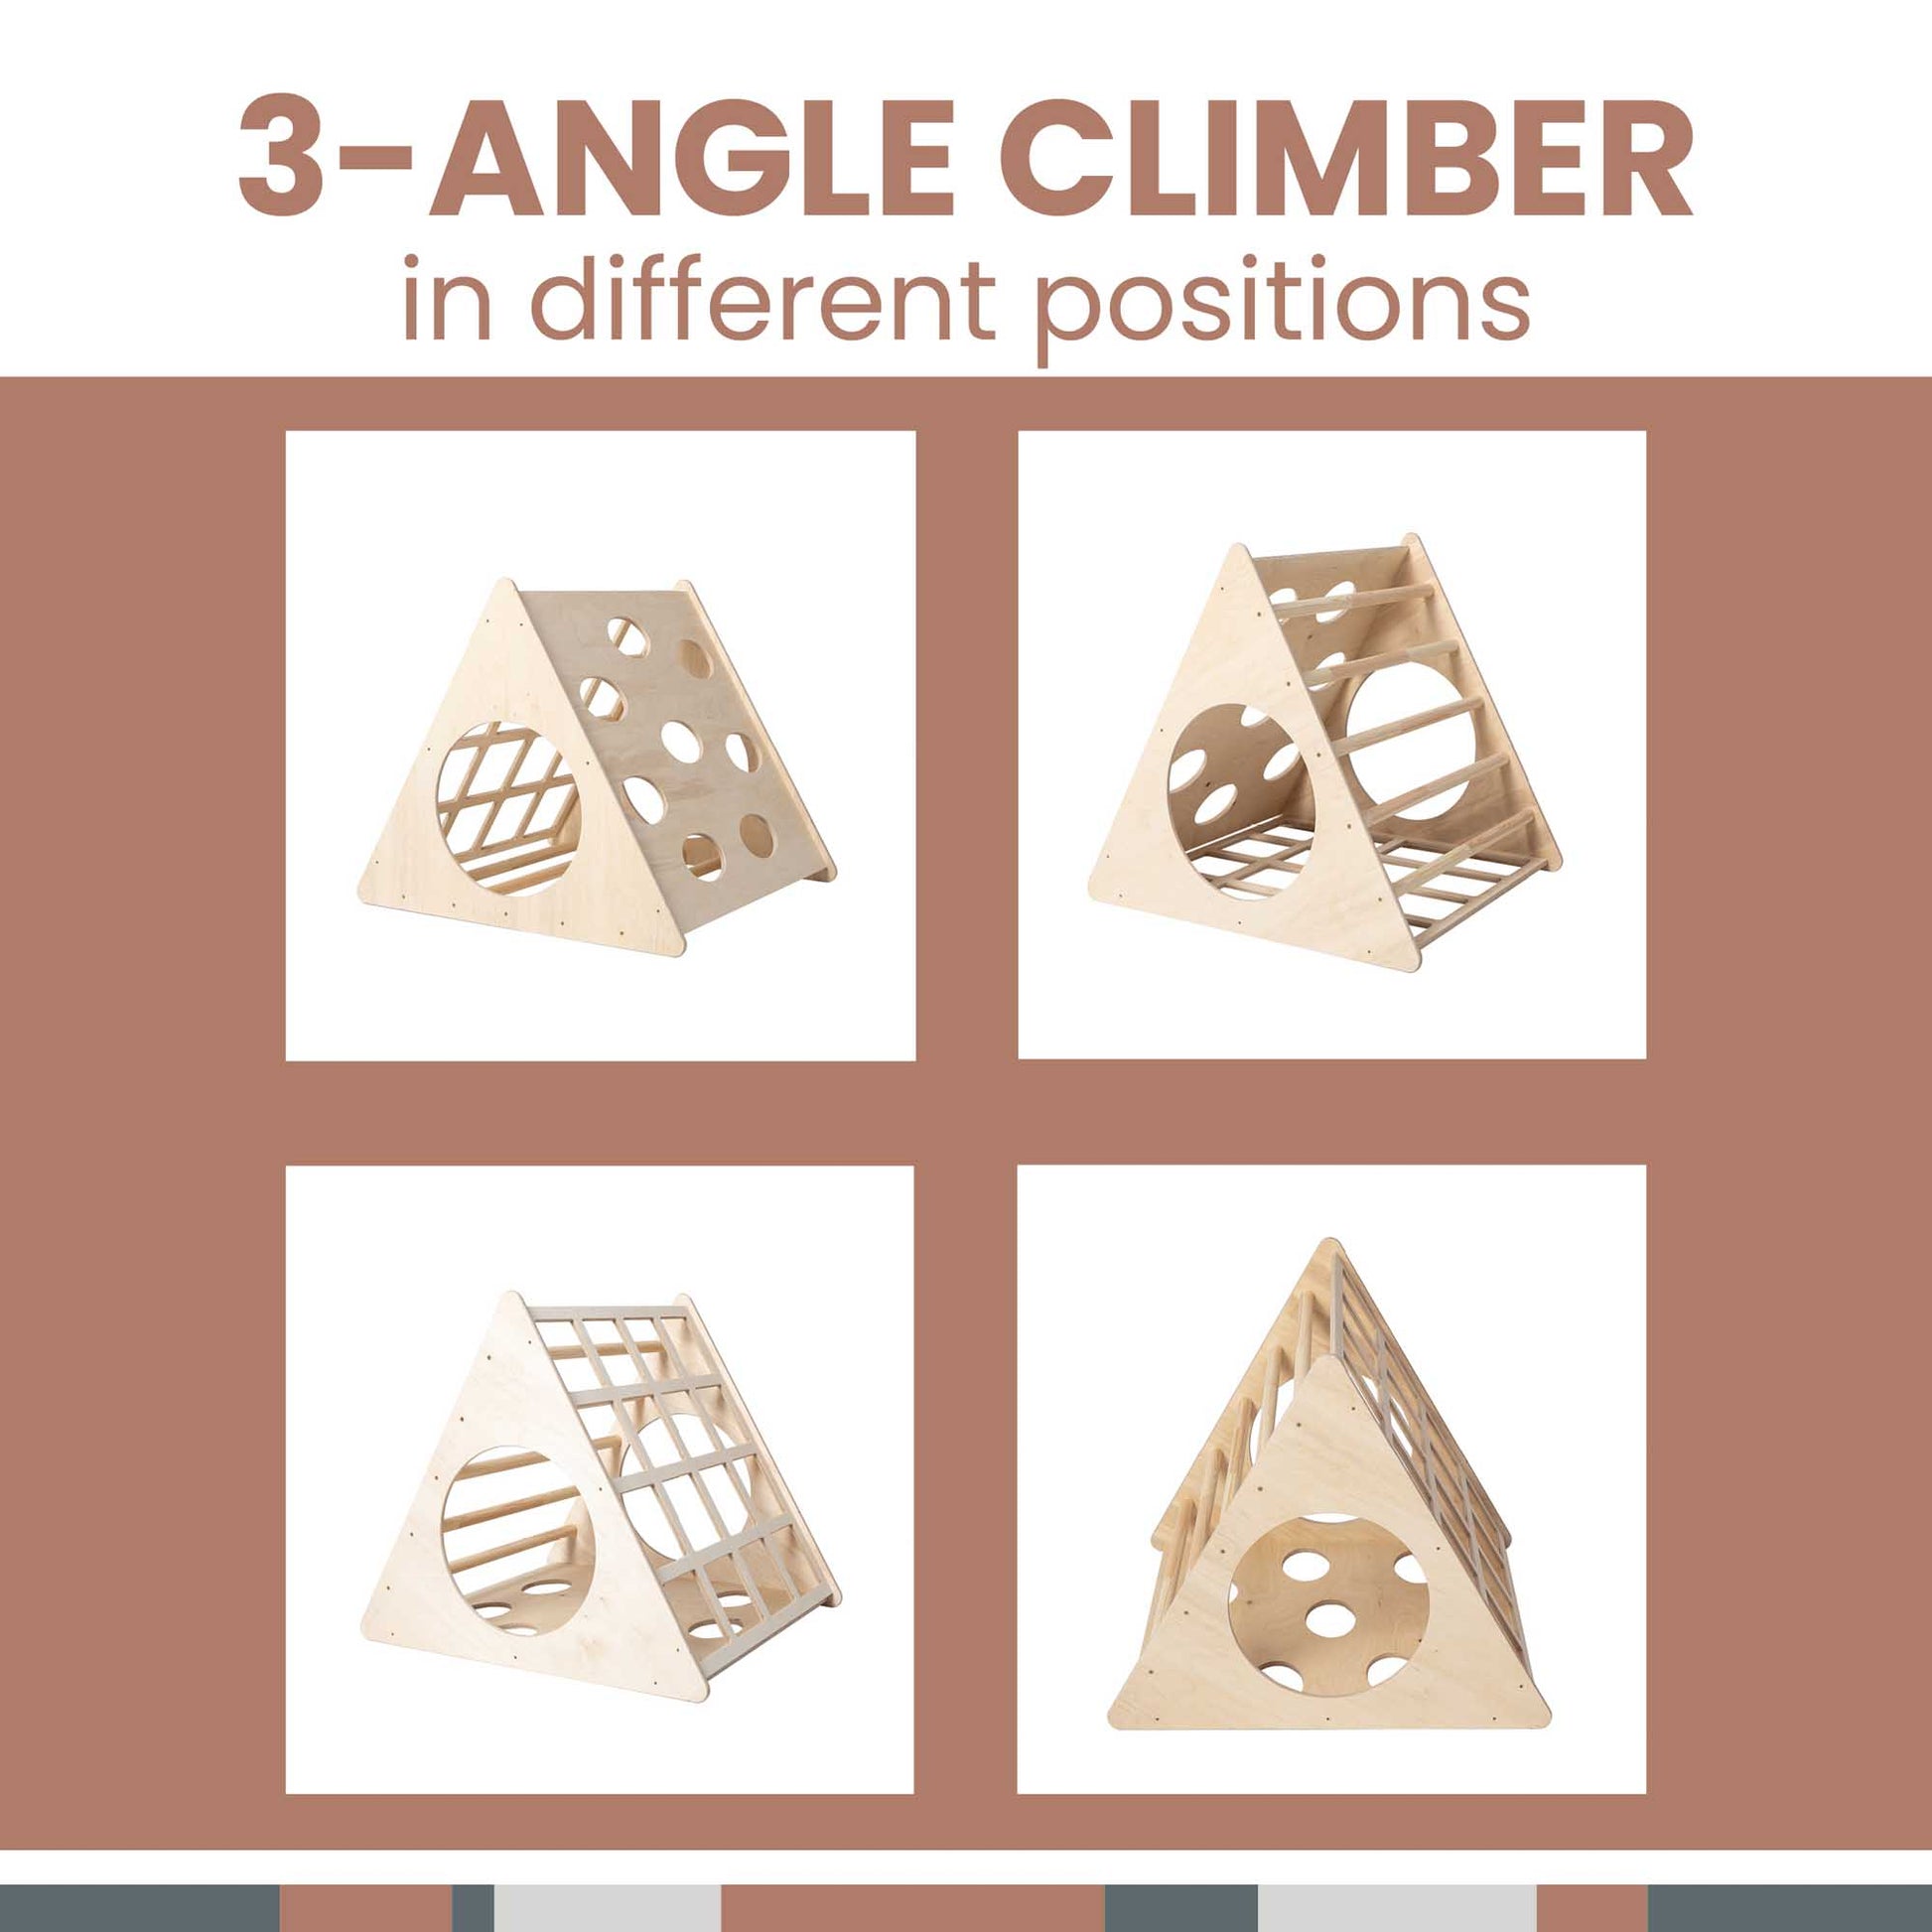 A climbing triangle + Transformable climbing gym + a ramp in different positions, perfect for indoor gym activities.